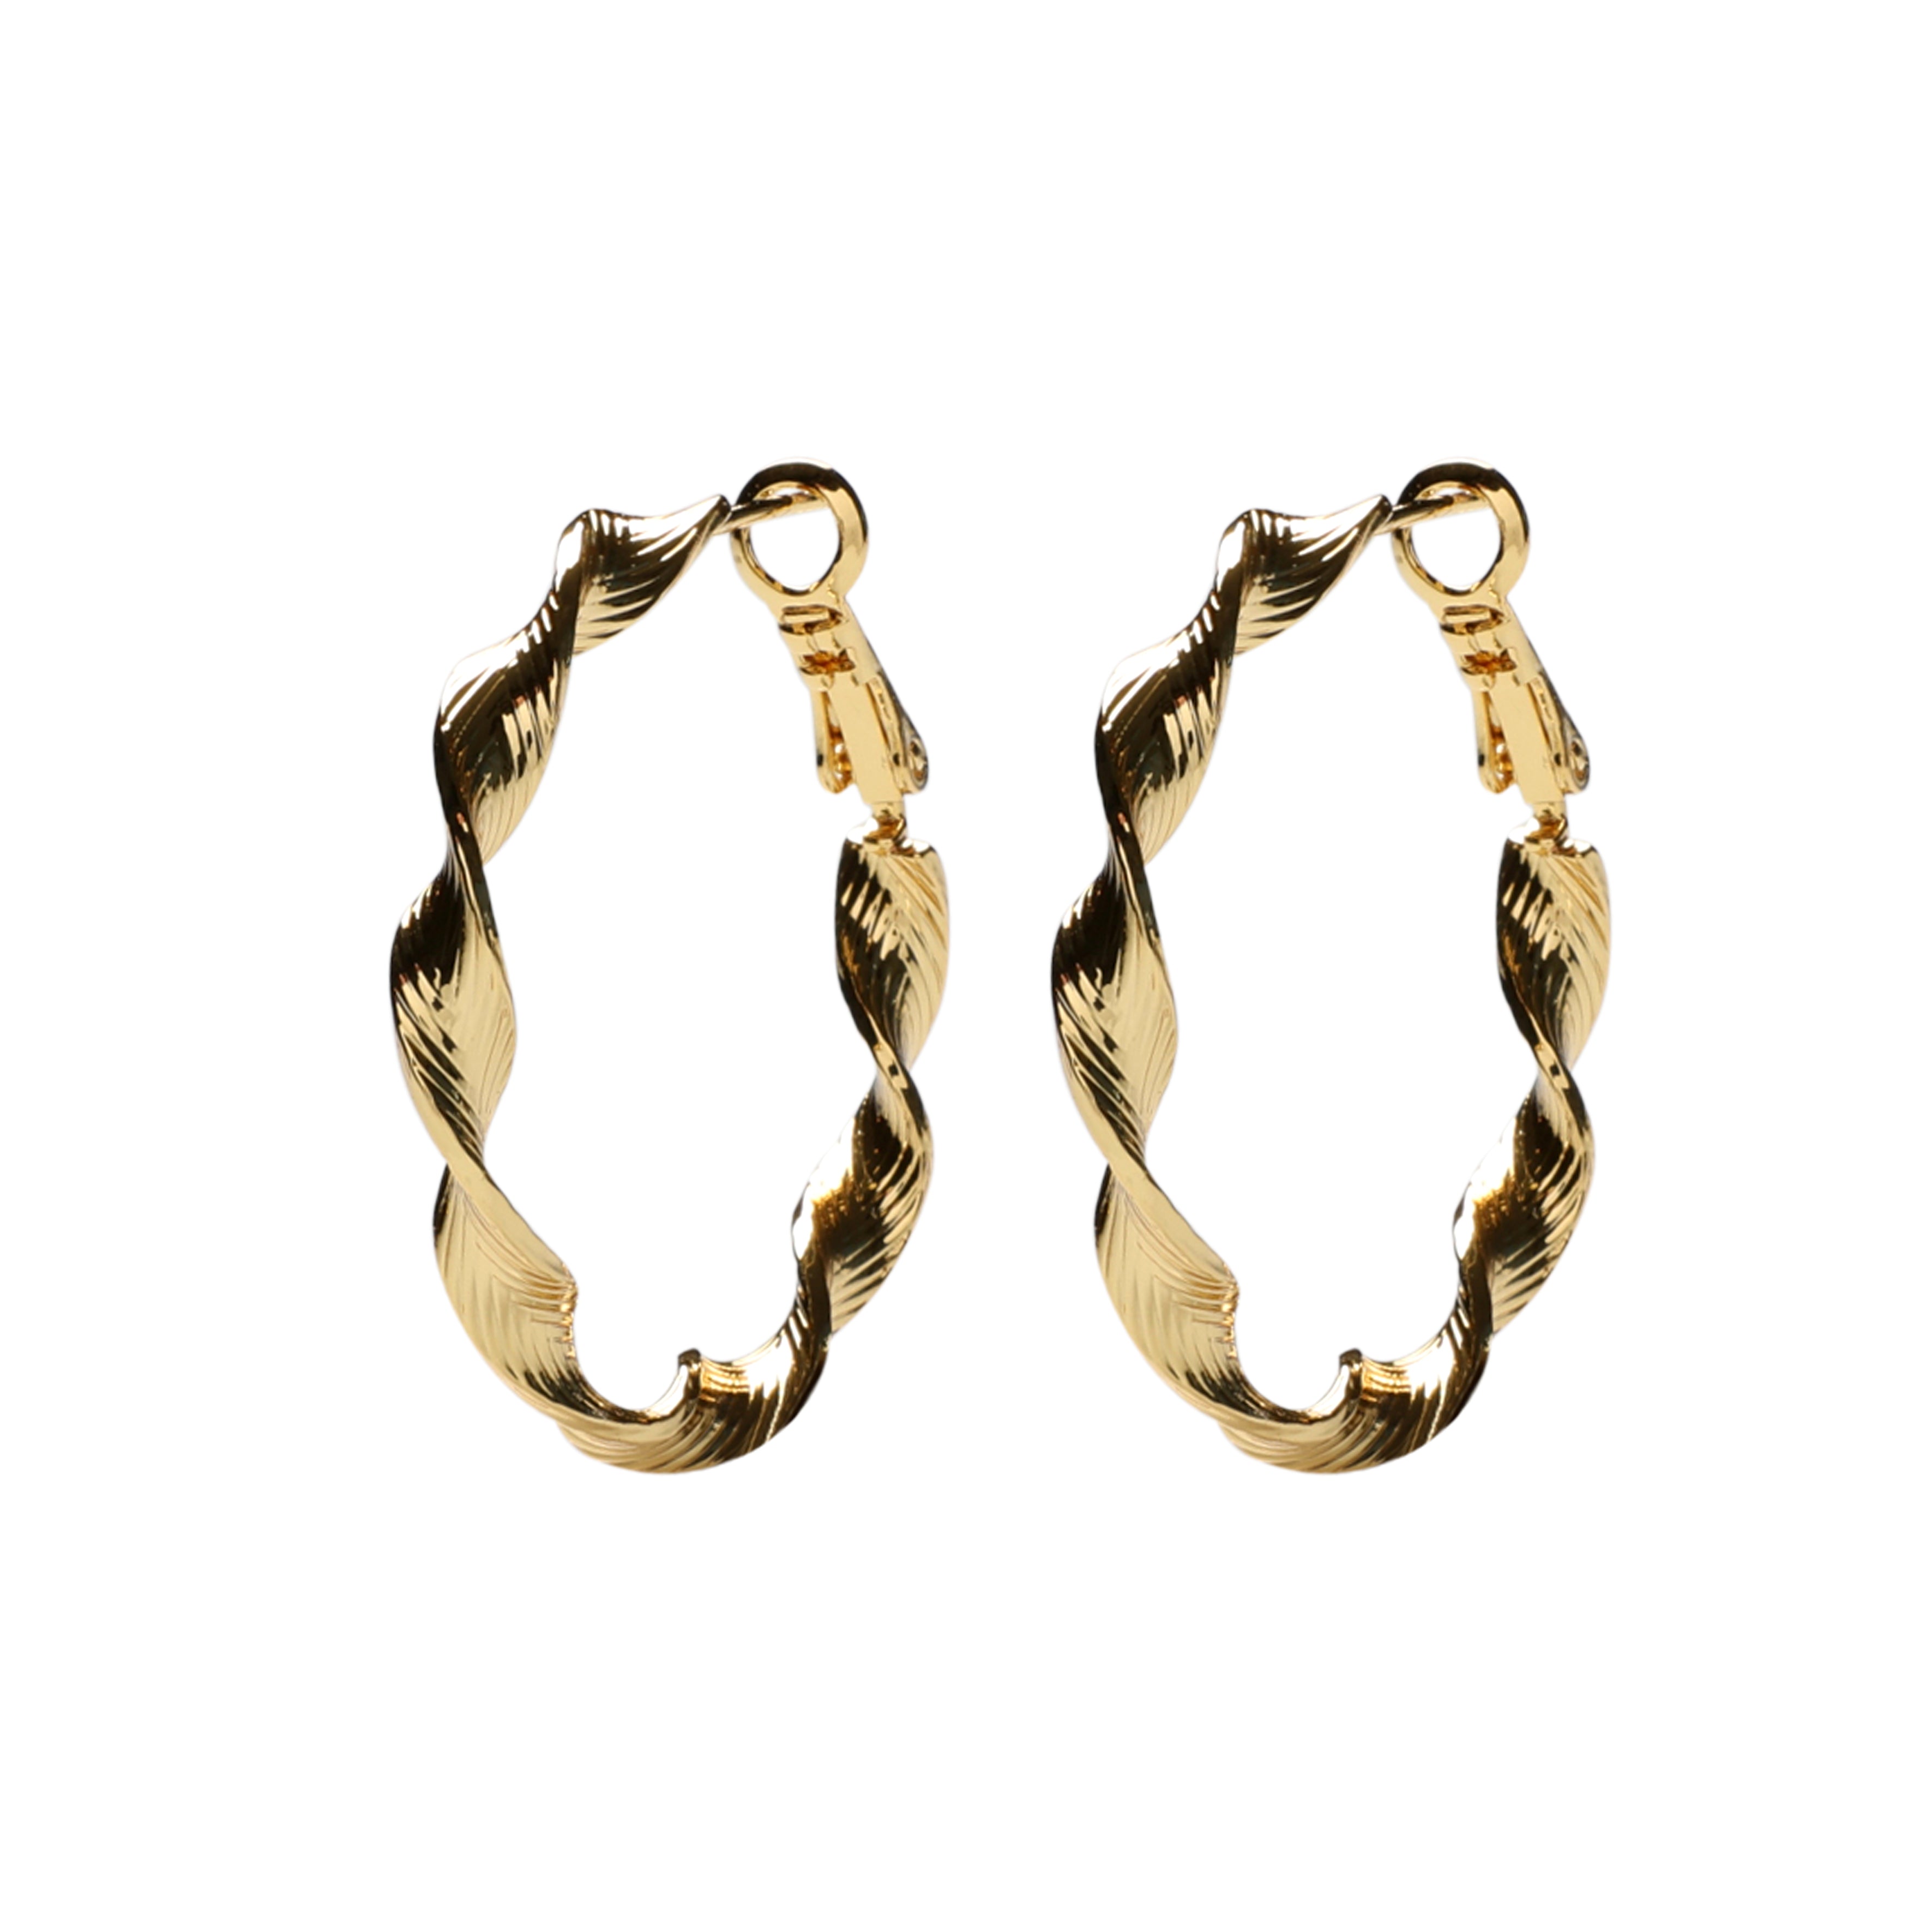 Twisted hoops - 35 mm, 18K gold-plated, 1 pair